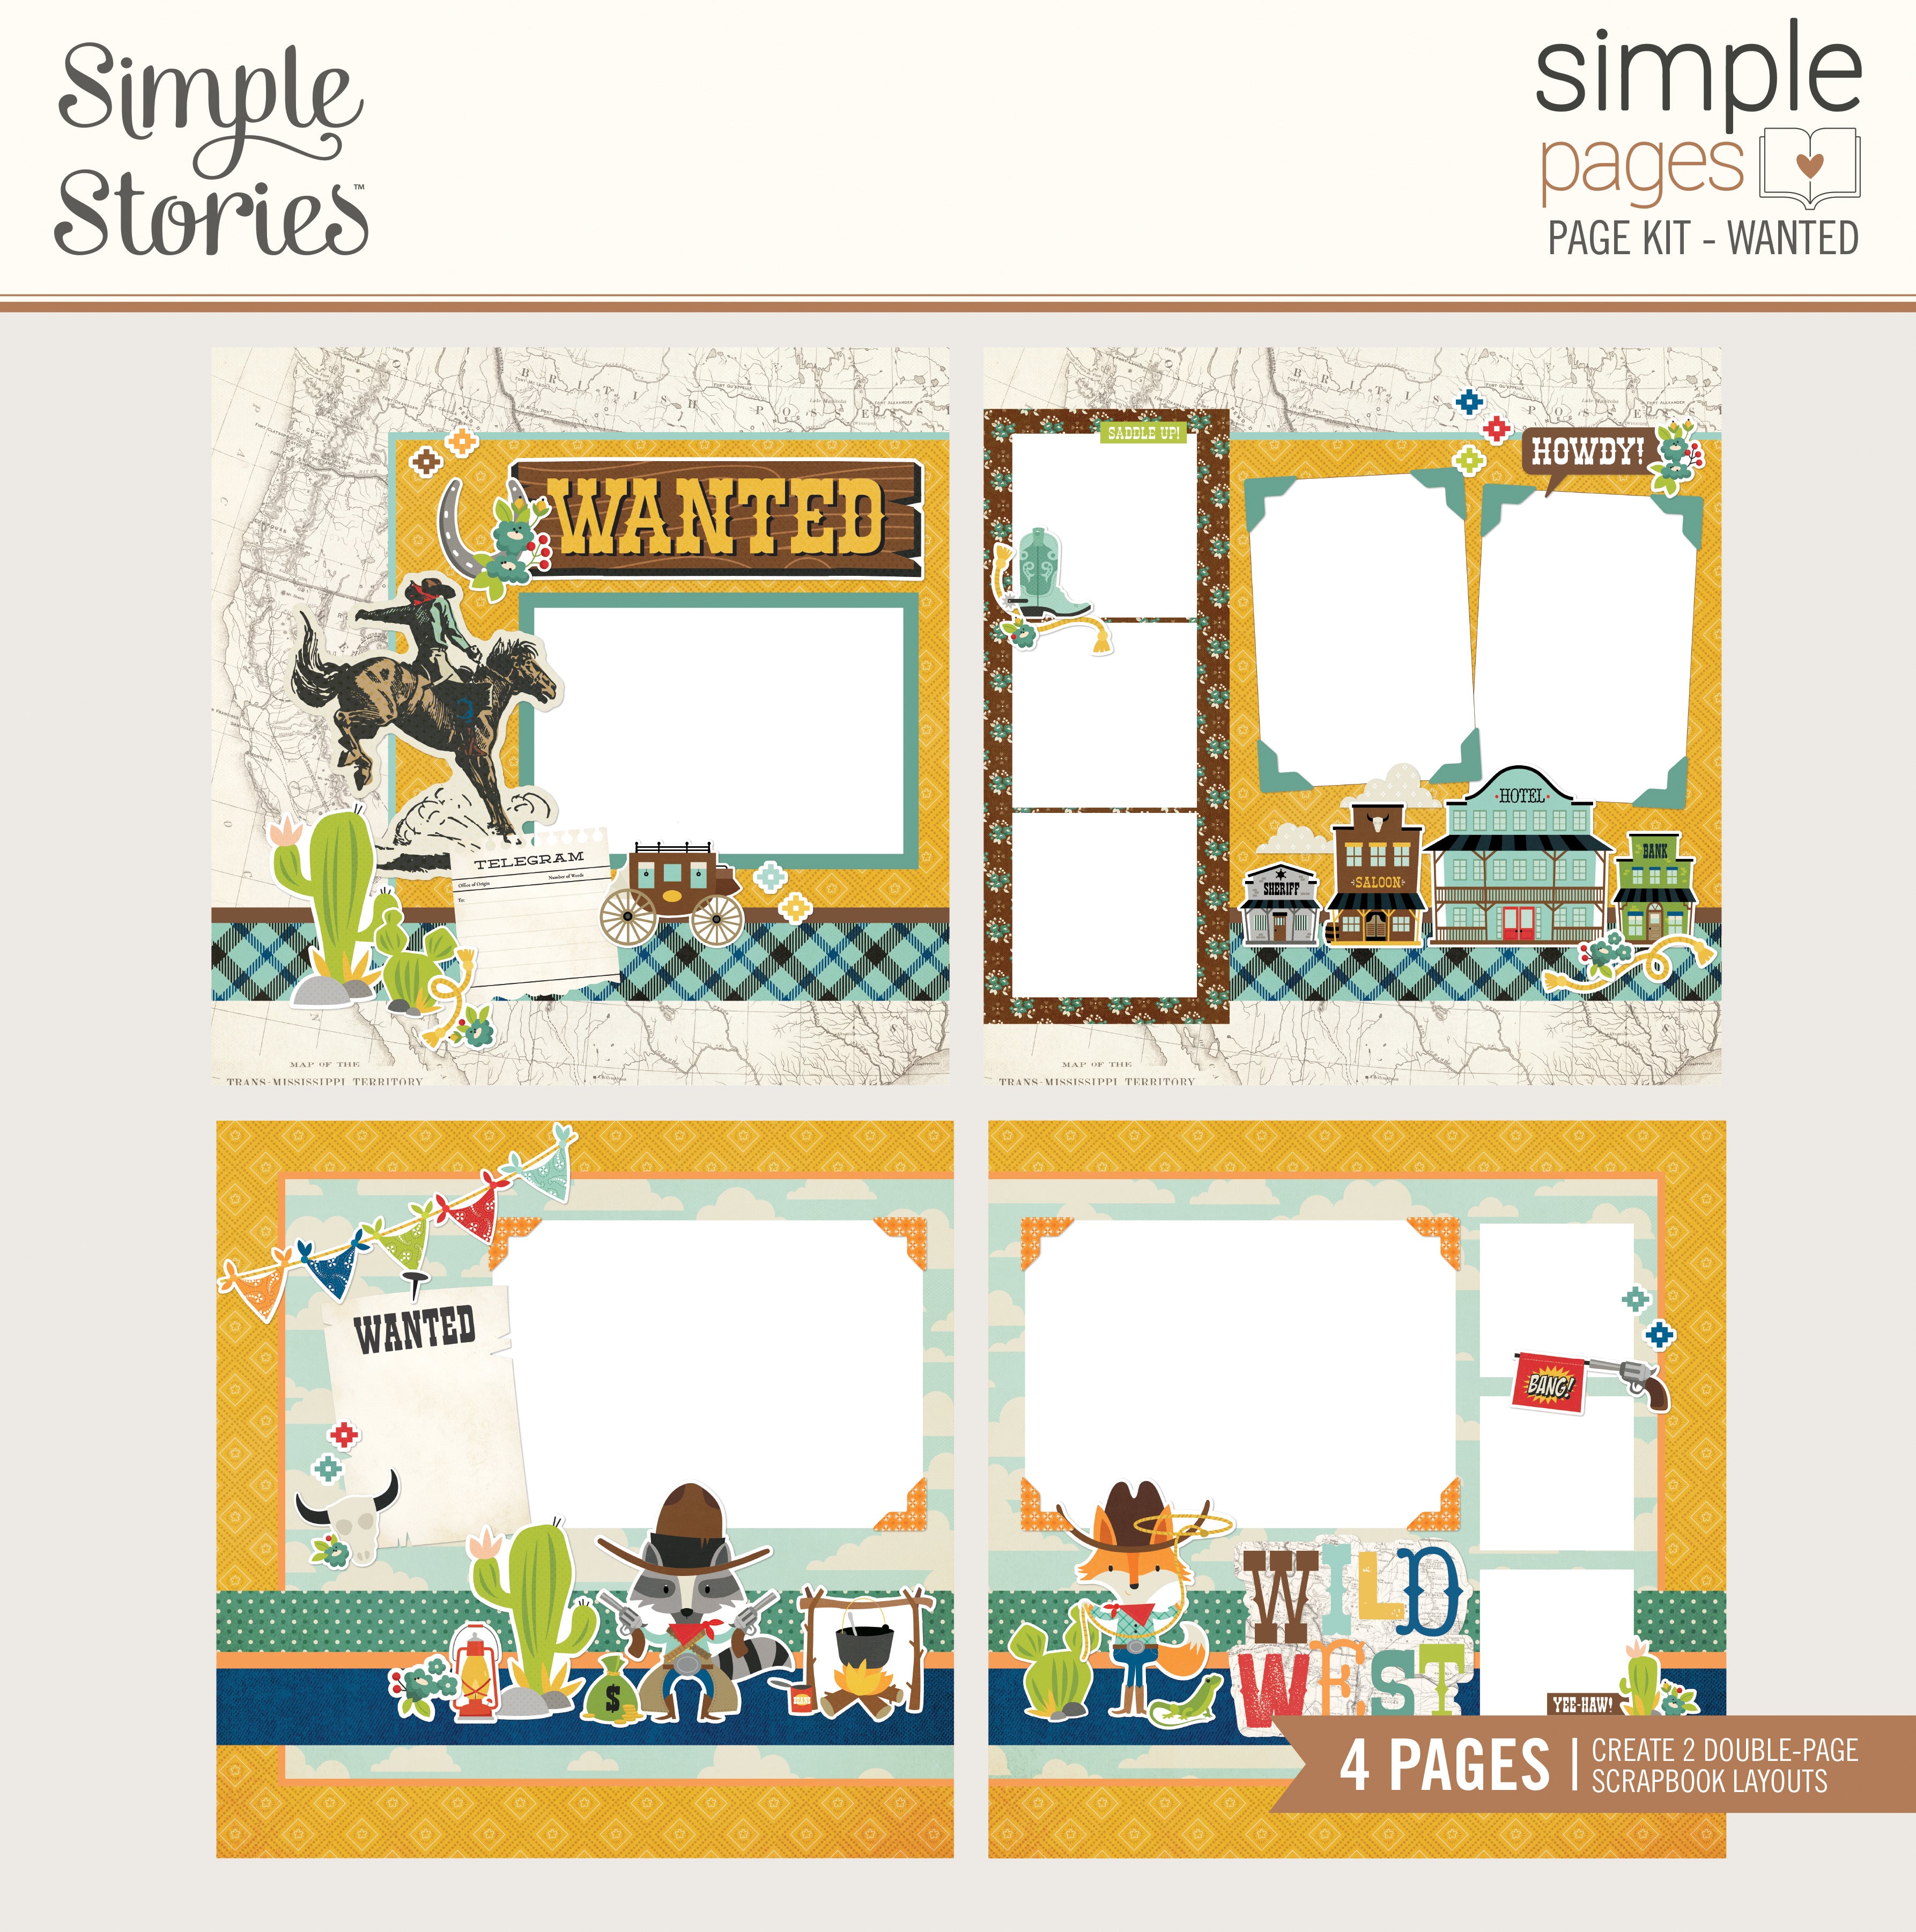 Simple Pages Page Pieces - Enjoy the Everyday – Simple Stories